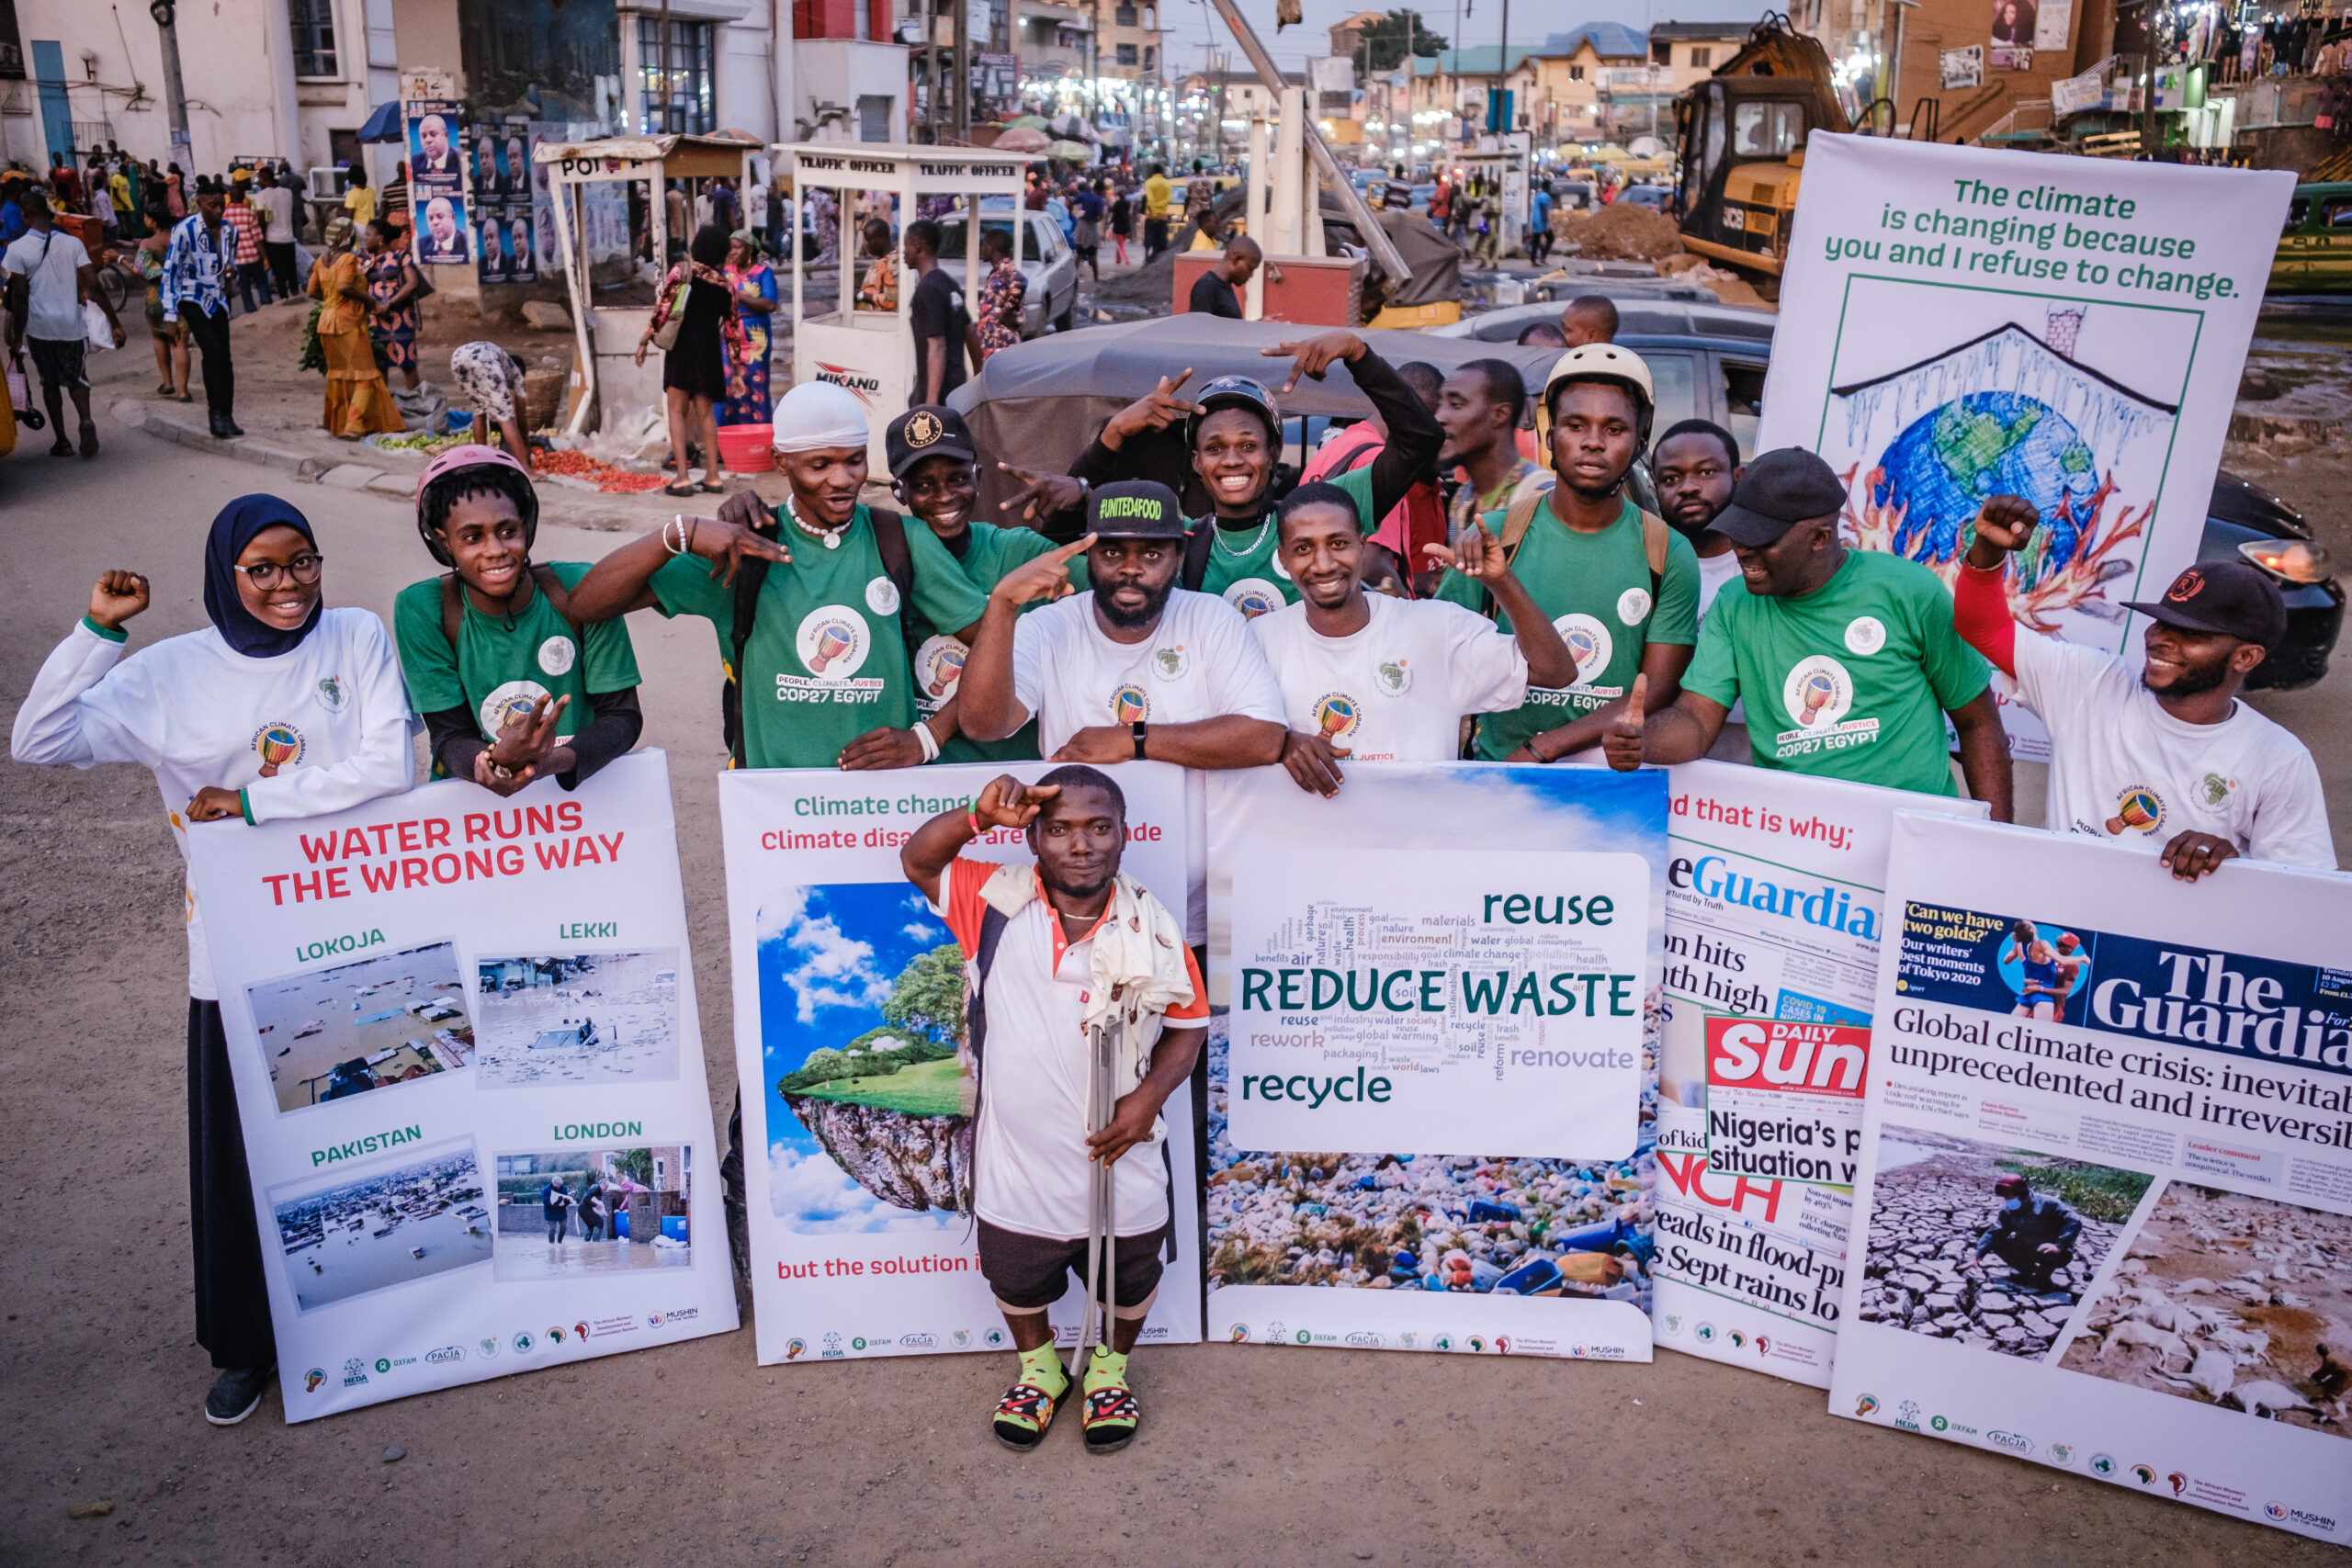 LAGOS, NG - OCTOBER 13, 2022: Group photograph of volunteers and skaters which marks the end of caravan climate change walk on October 13, 2022 in Ikeja, Lagos State, Nigeria. CREDIT: Taiwo Aina for Oxfam Novib